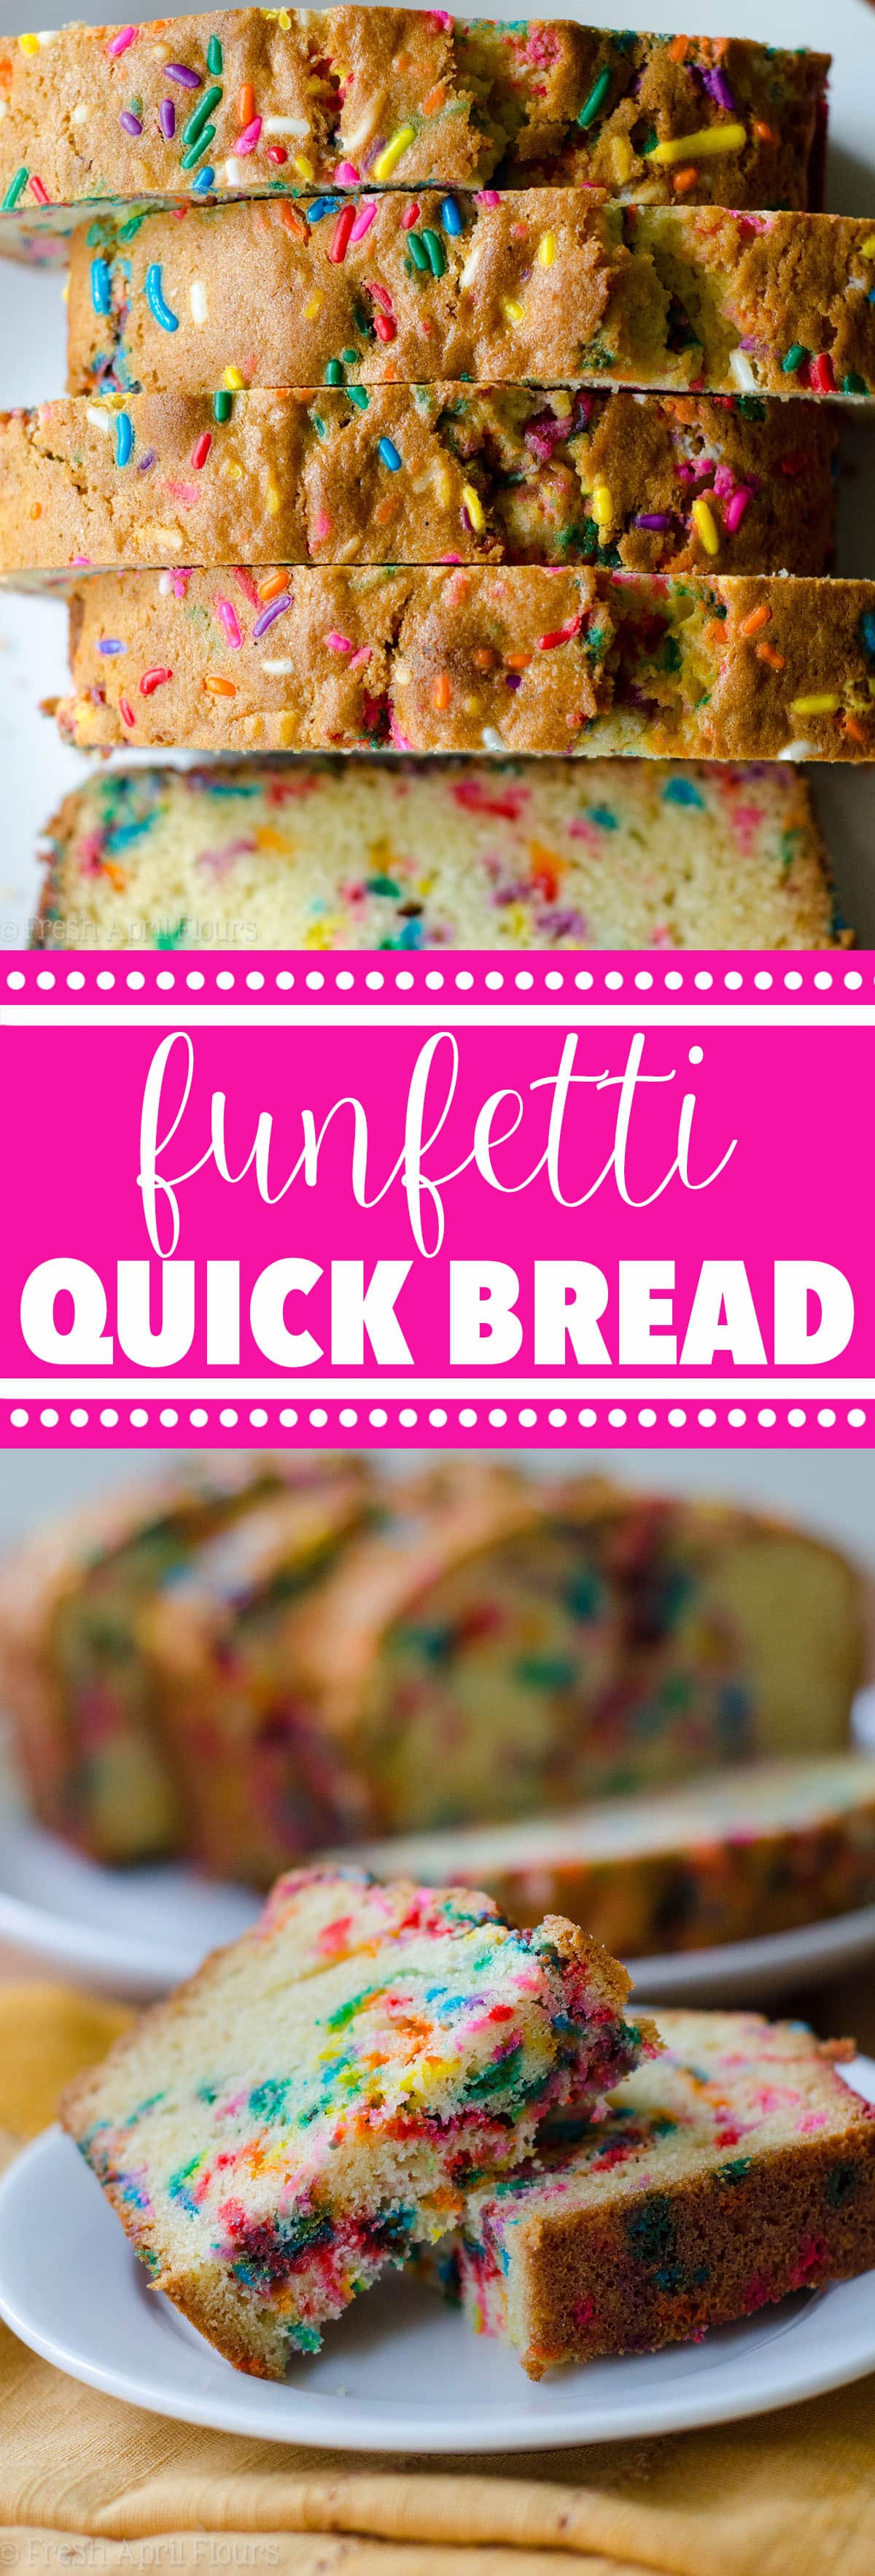 Funfetti Quick Bread: An easy vanilla almond quick bread filled with colorful sprinkles, perfect for any celebration. No mixer required! via @frshaprilflours